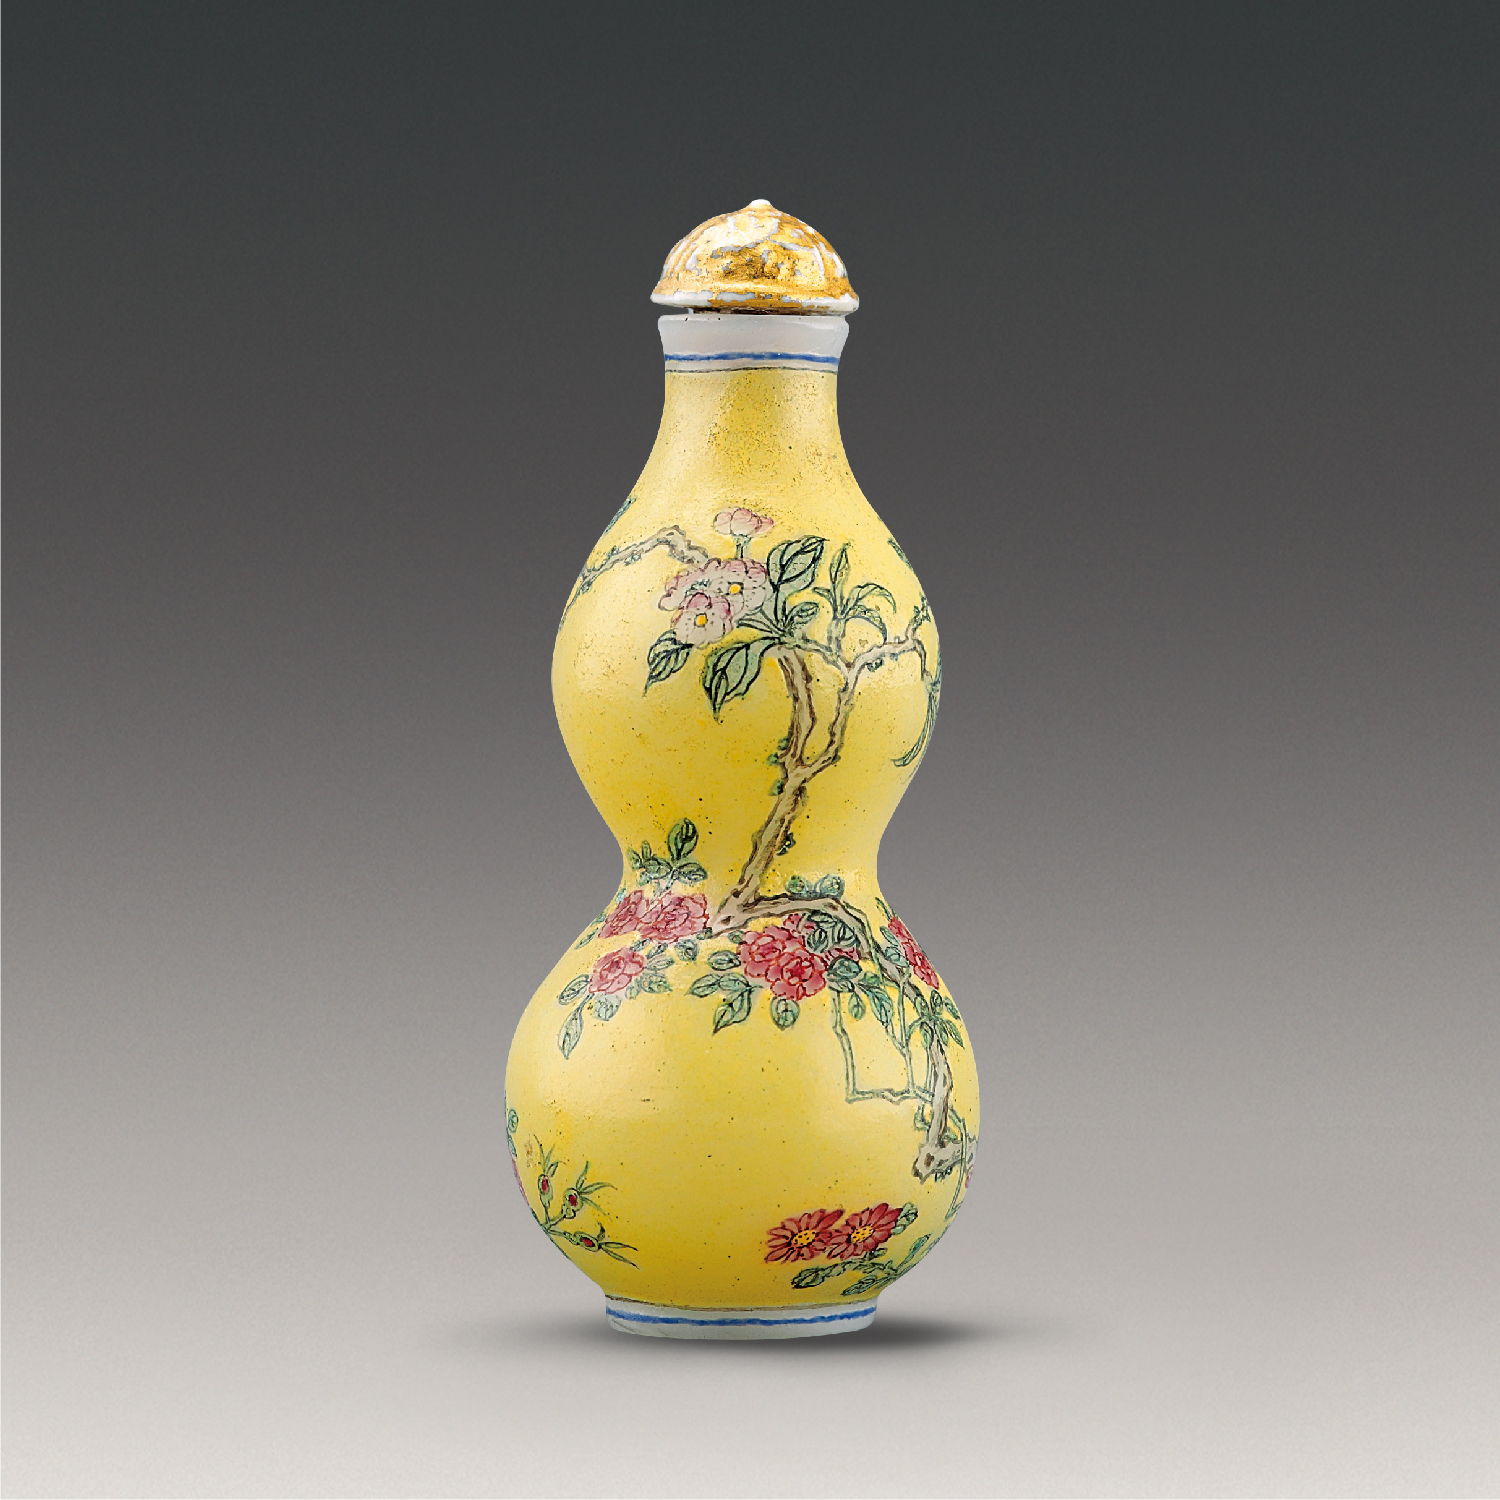 Double-gourd-shaped snuff bottle with floral design in painted enamels on yellow ground